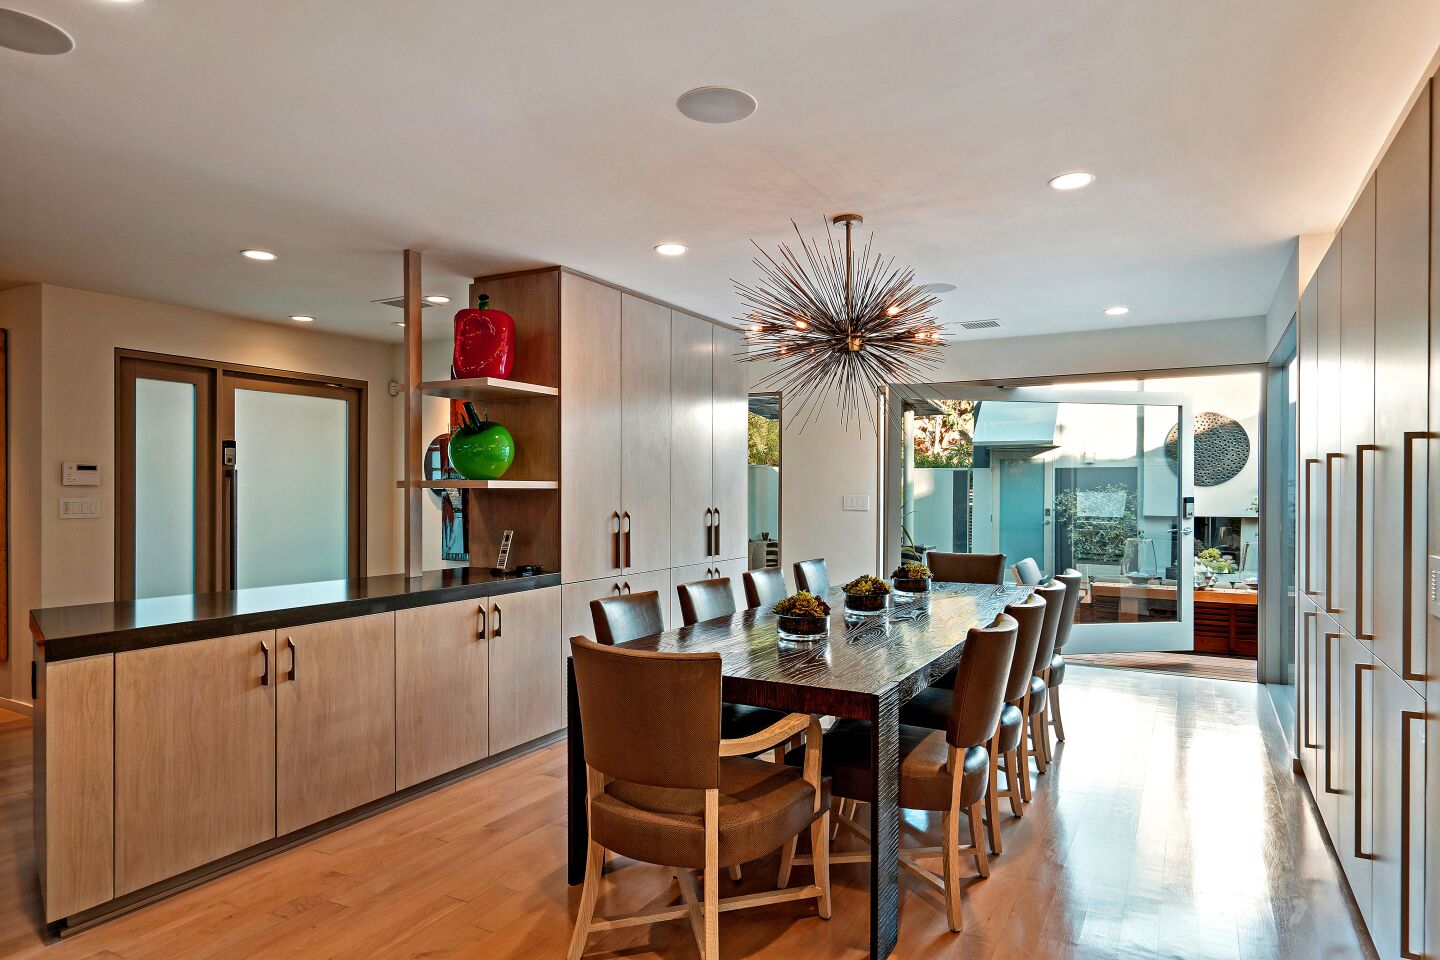 A dining area with a long table and chairs and cabinetry.